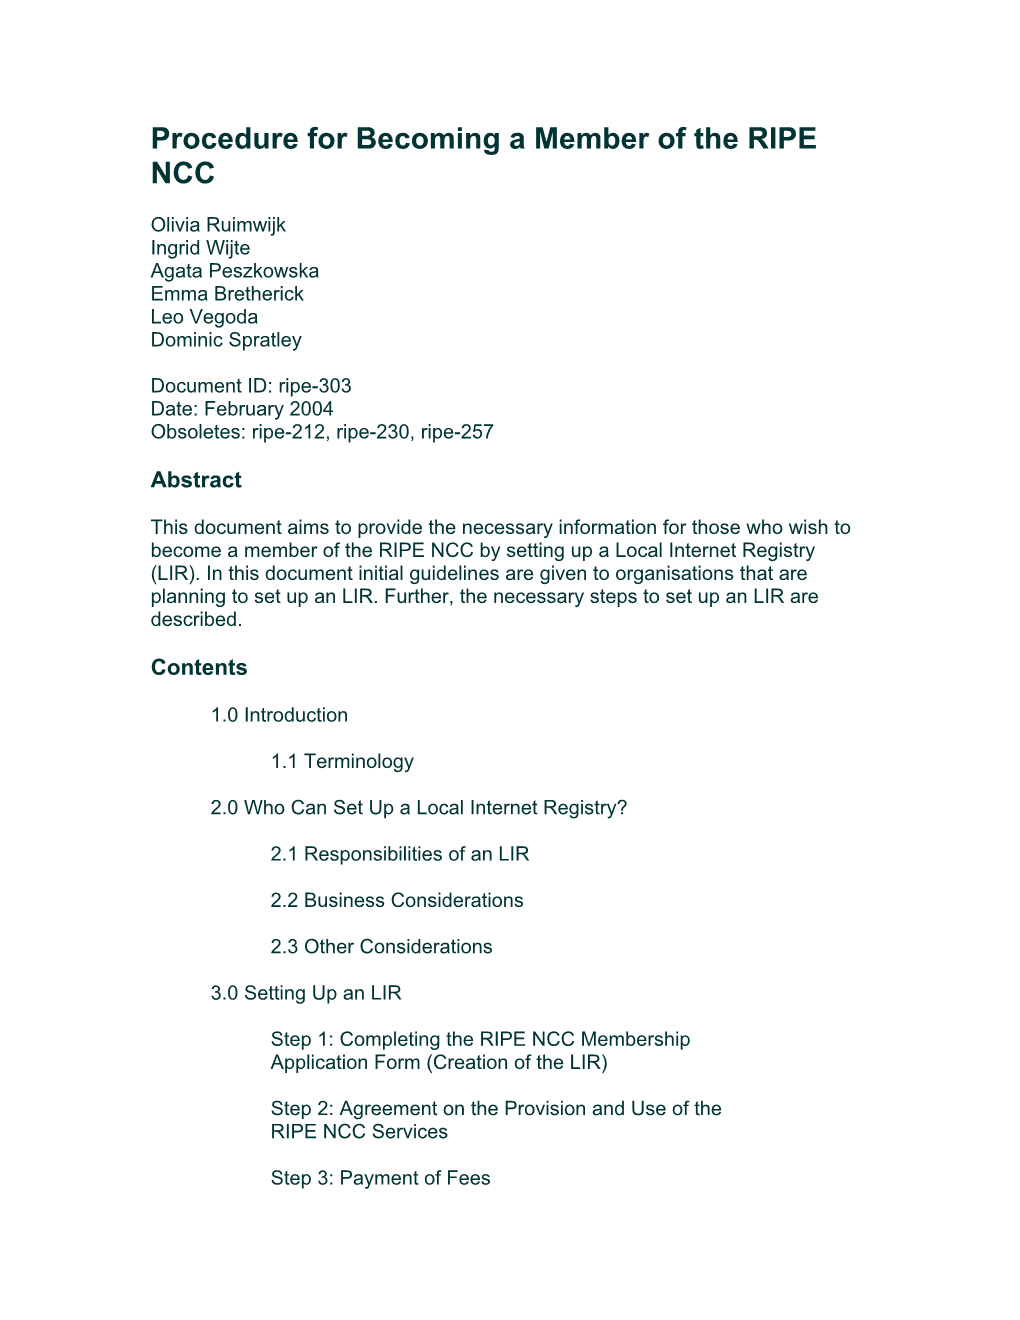 Procedure for Becoming a Member of the RIPE NCC